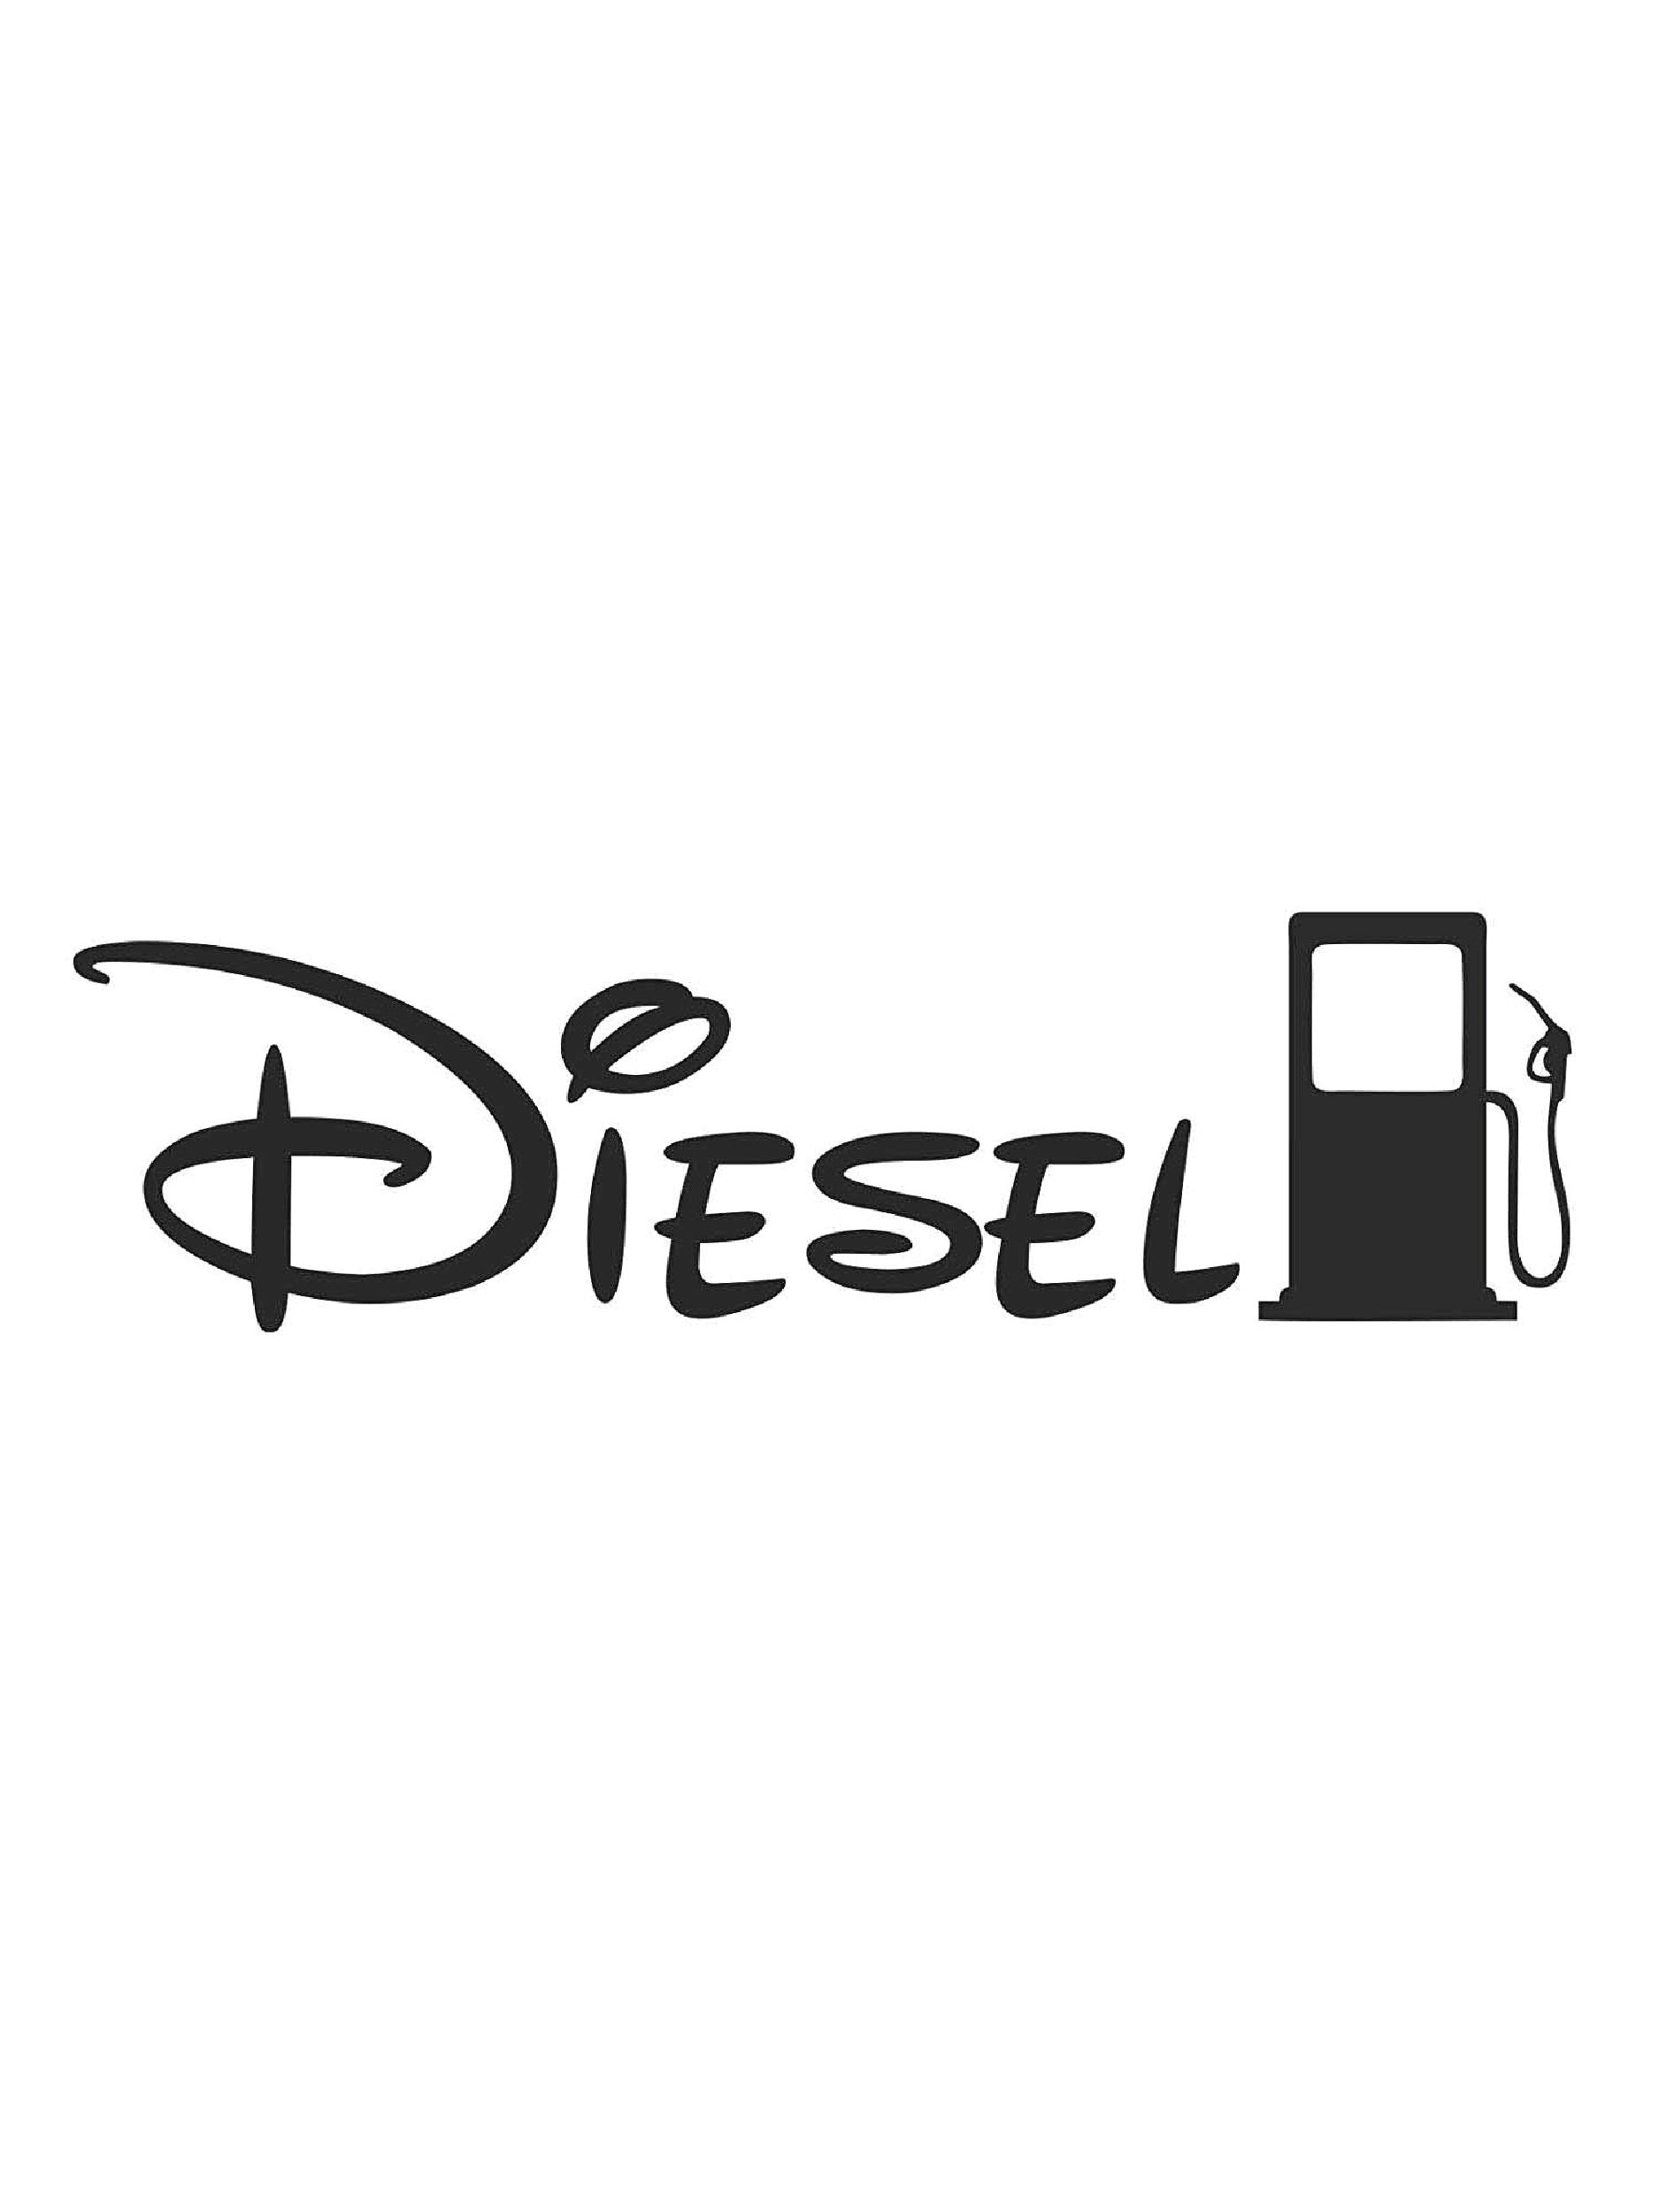 Diesel Truck Stickers for Sale | Redbubble